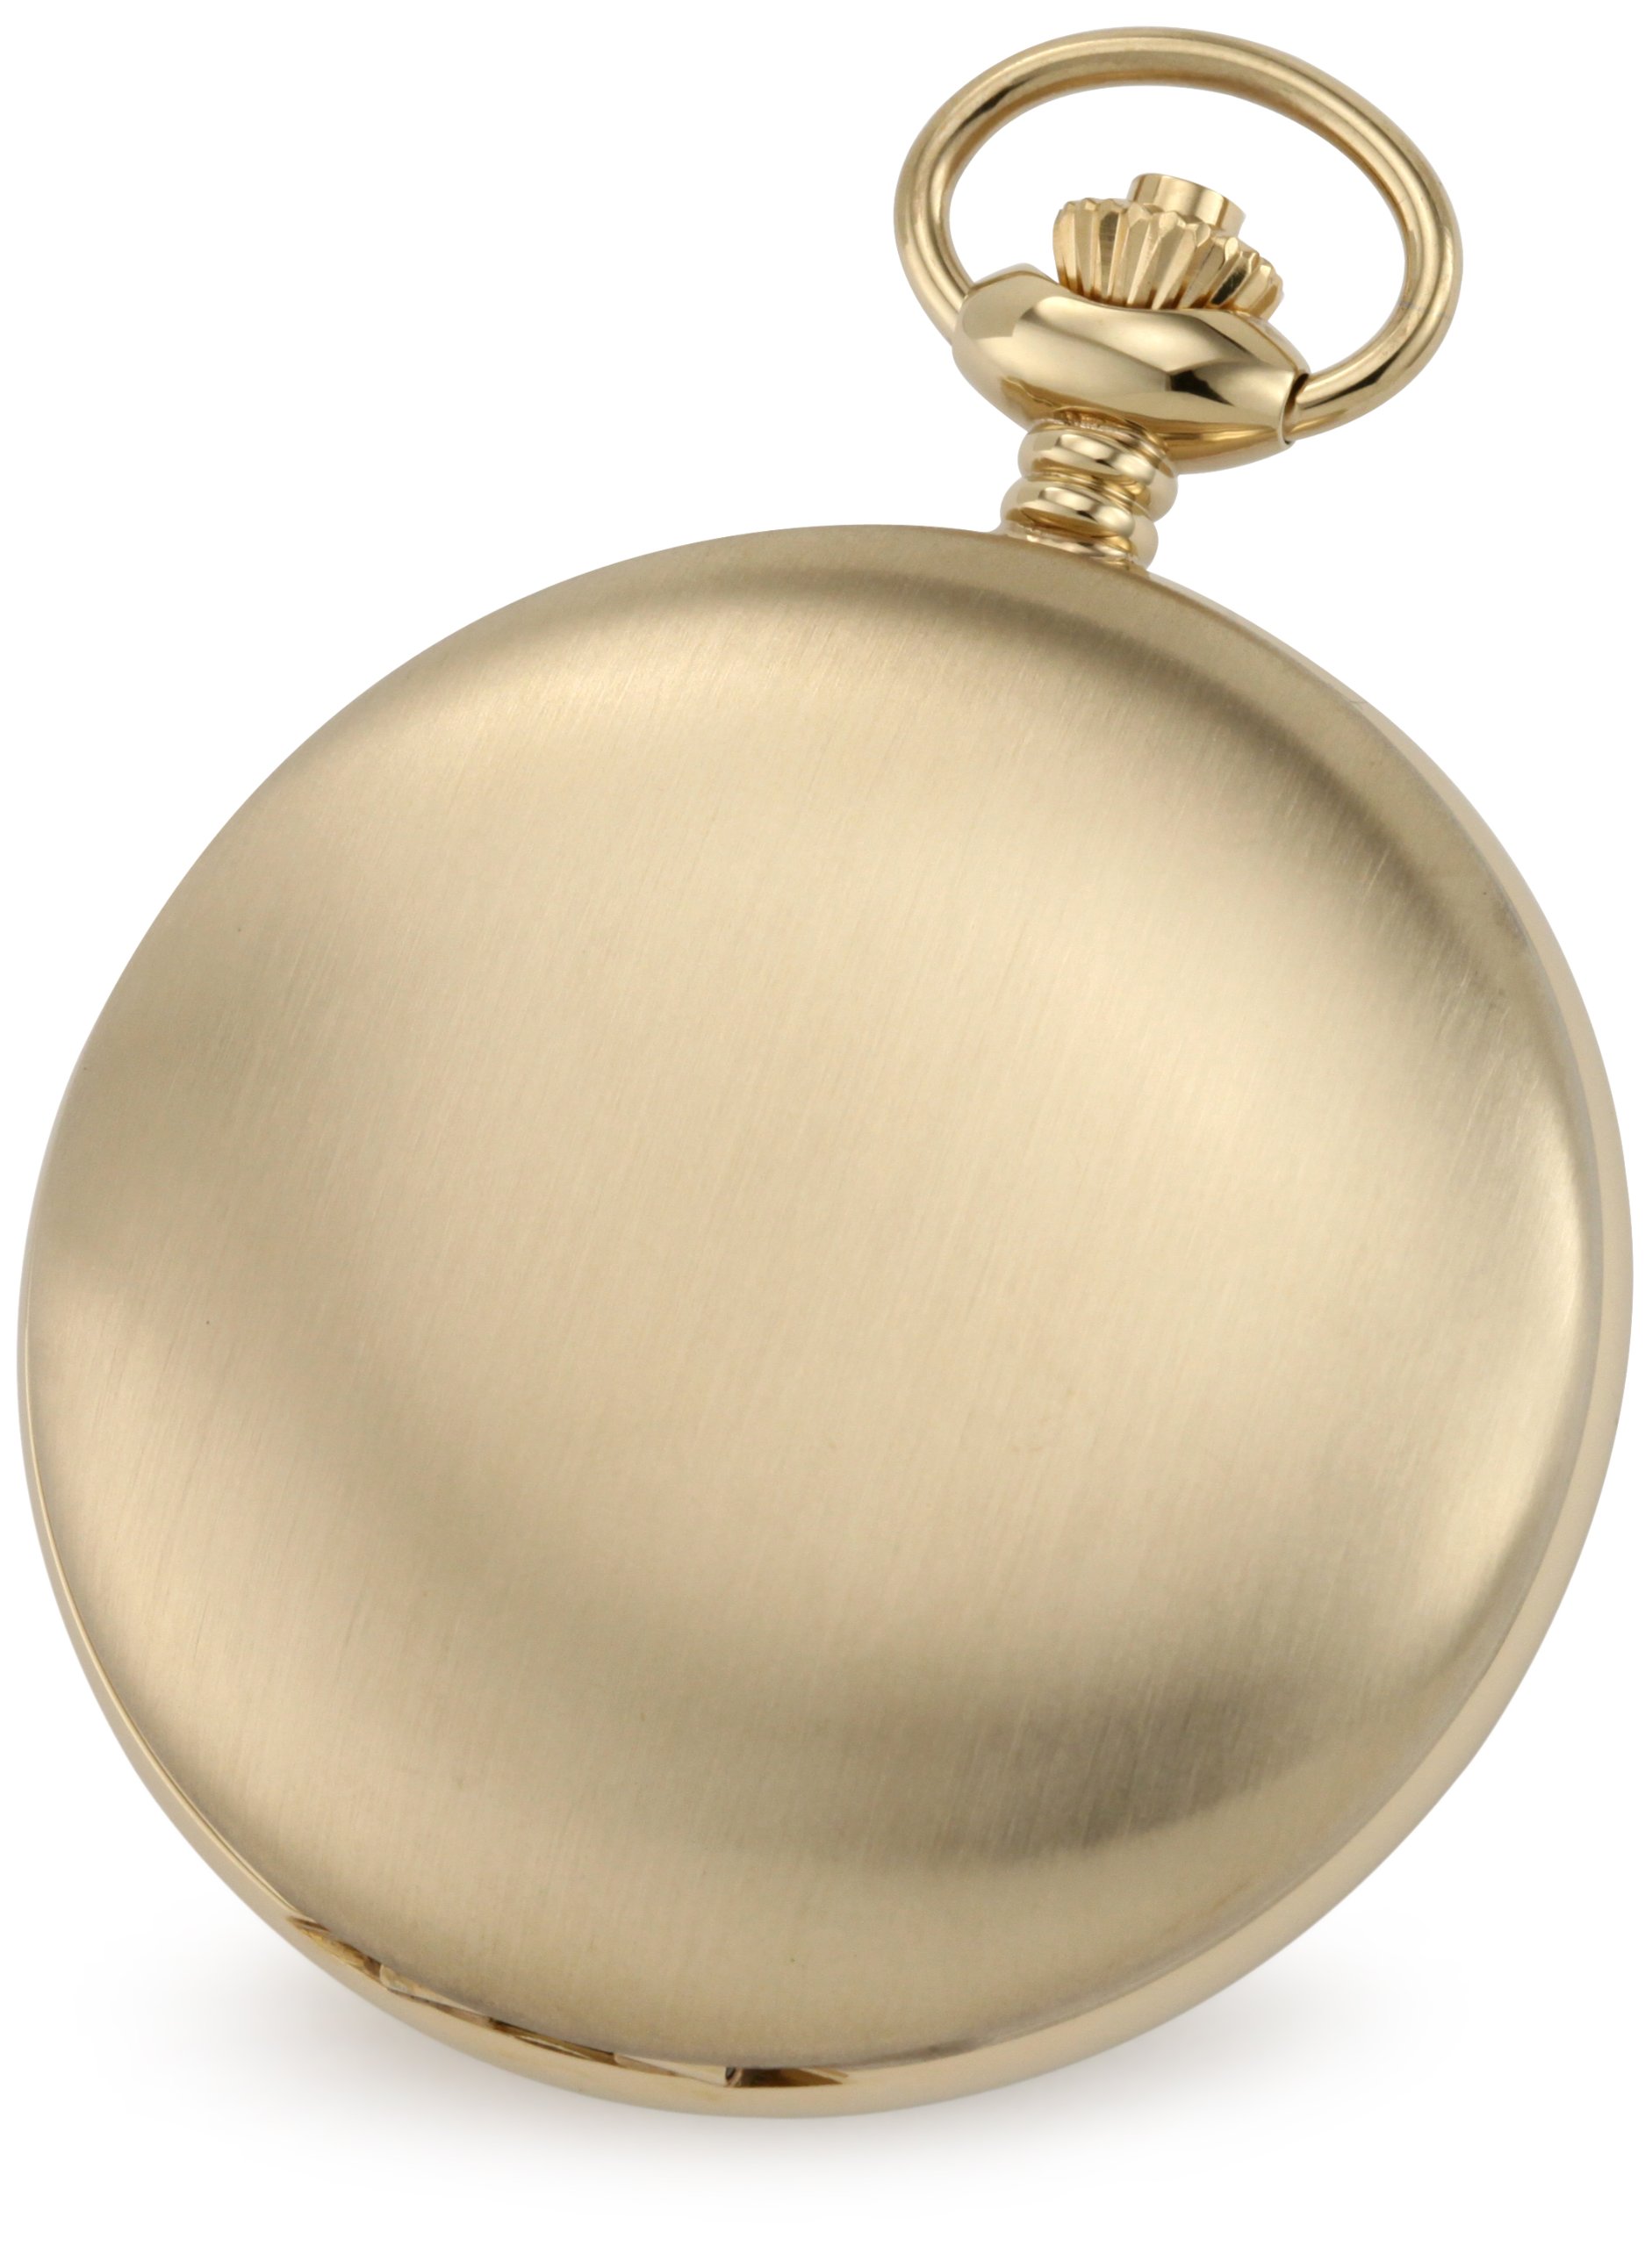 Charles-Hubert, Paris 3906-G Premium Collection Gold-Plated Stainless Steel Satin Finish Hunter Case Mechanical Pocket Watch